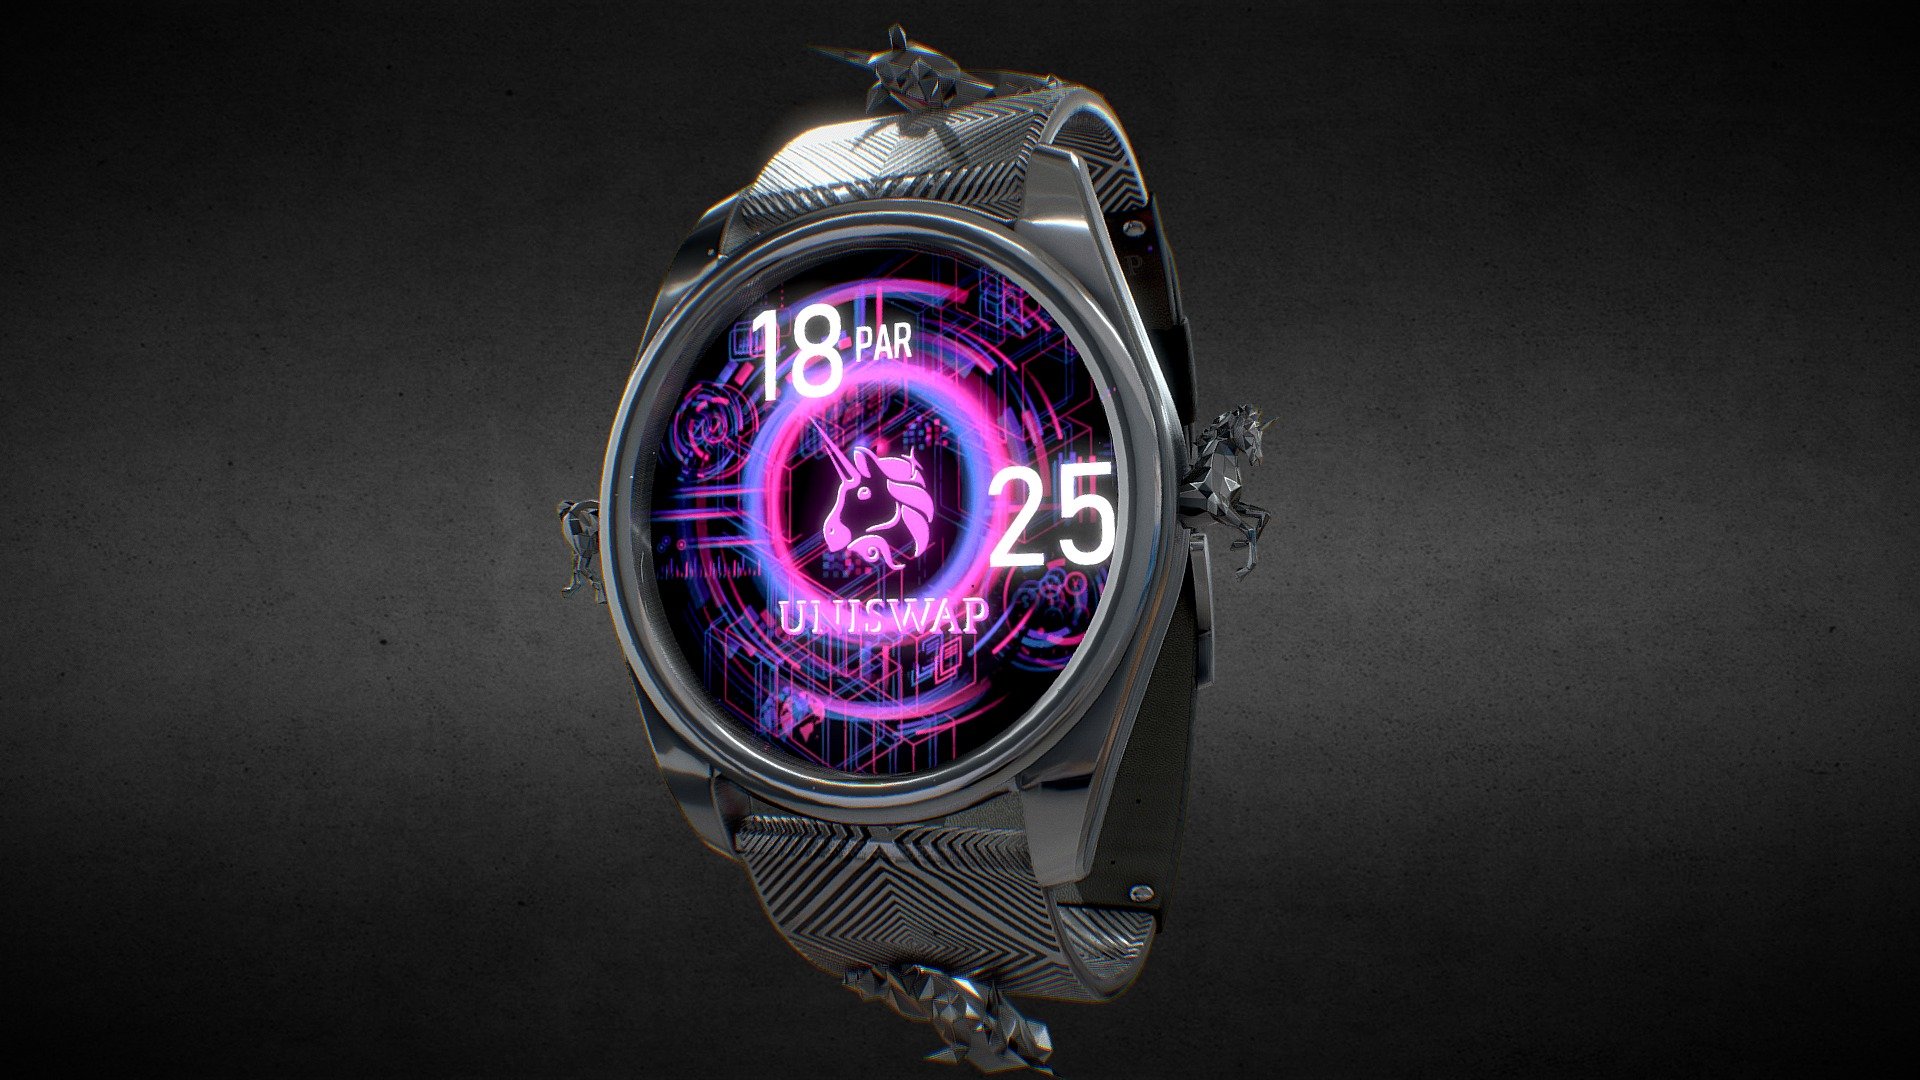 Awersome stainless steel Uniswap Coin Watch.

Currently available for download in FBX format.

3D model developed by AR-Watches 3d model